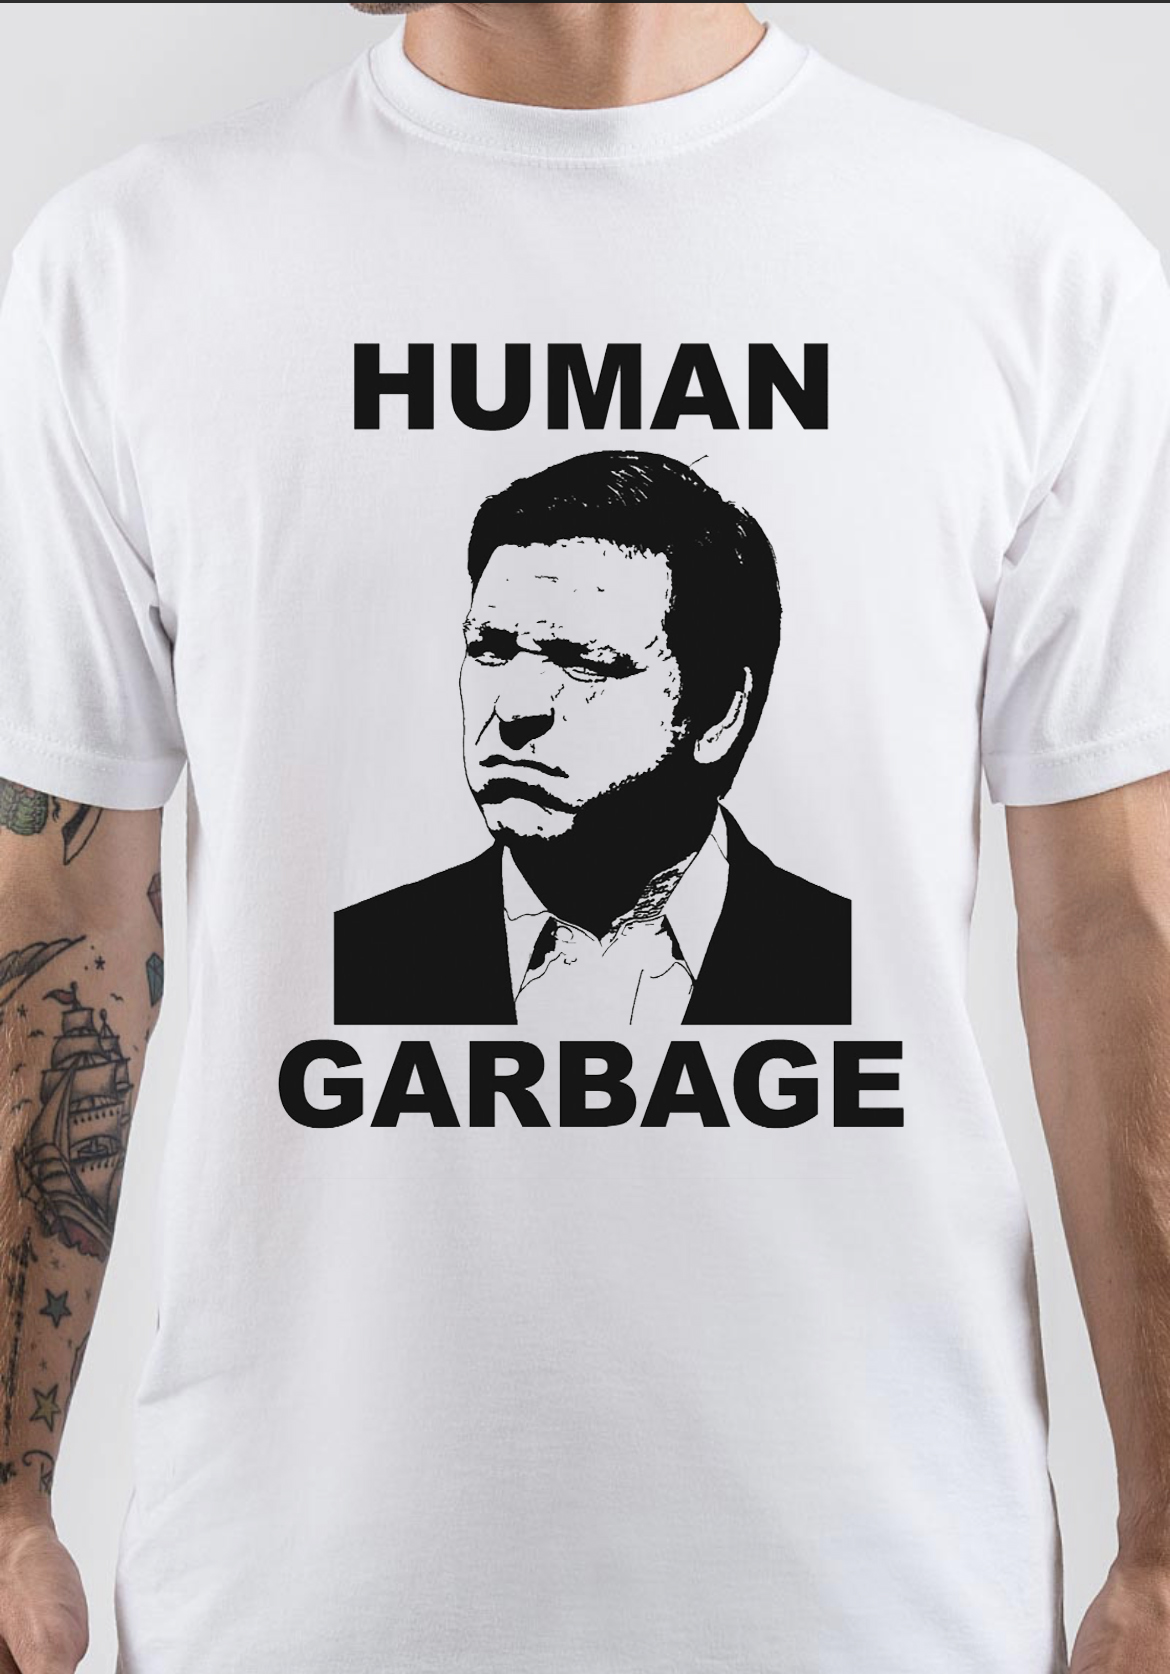 Human Garbage T-Shirt And Merchandise